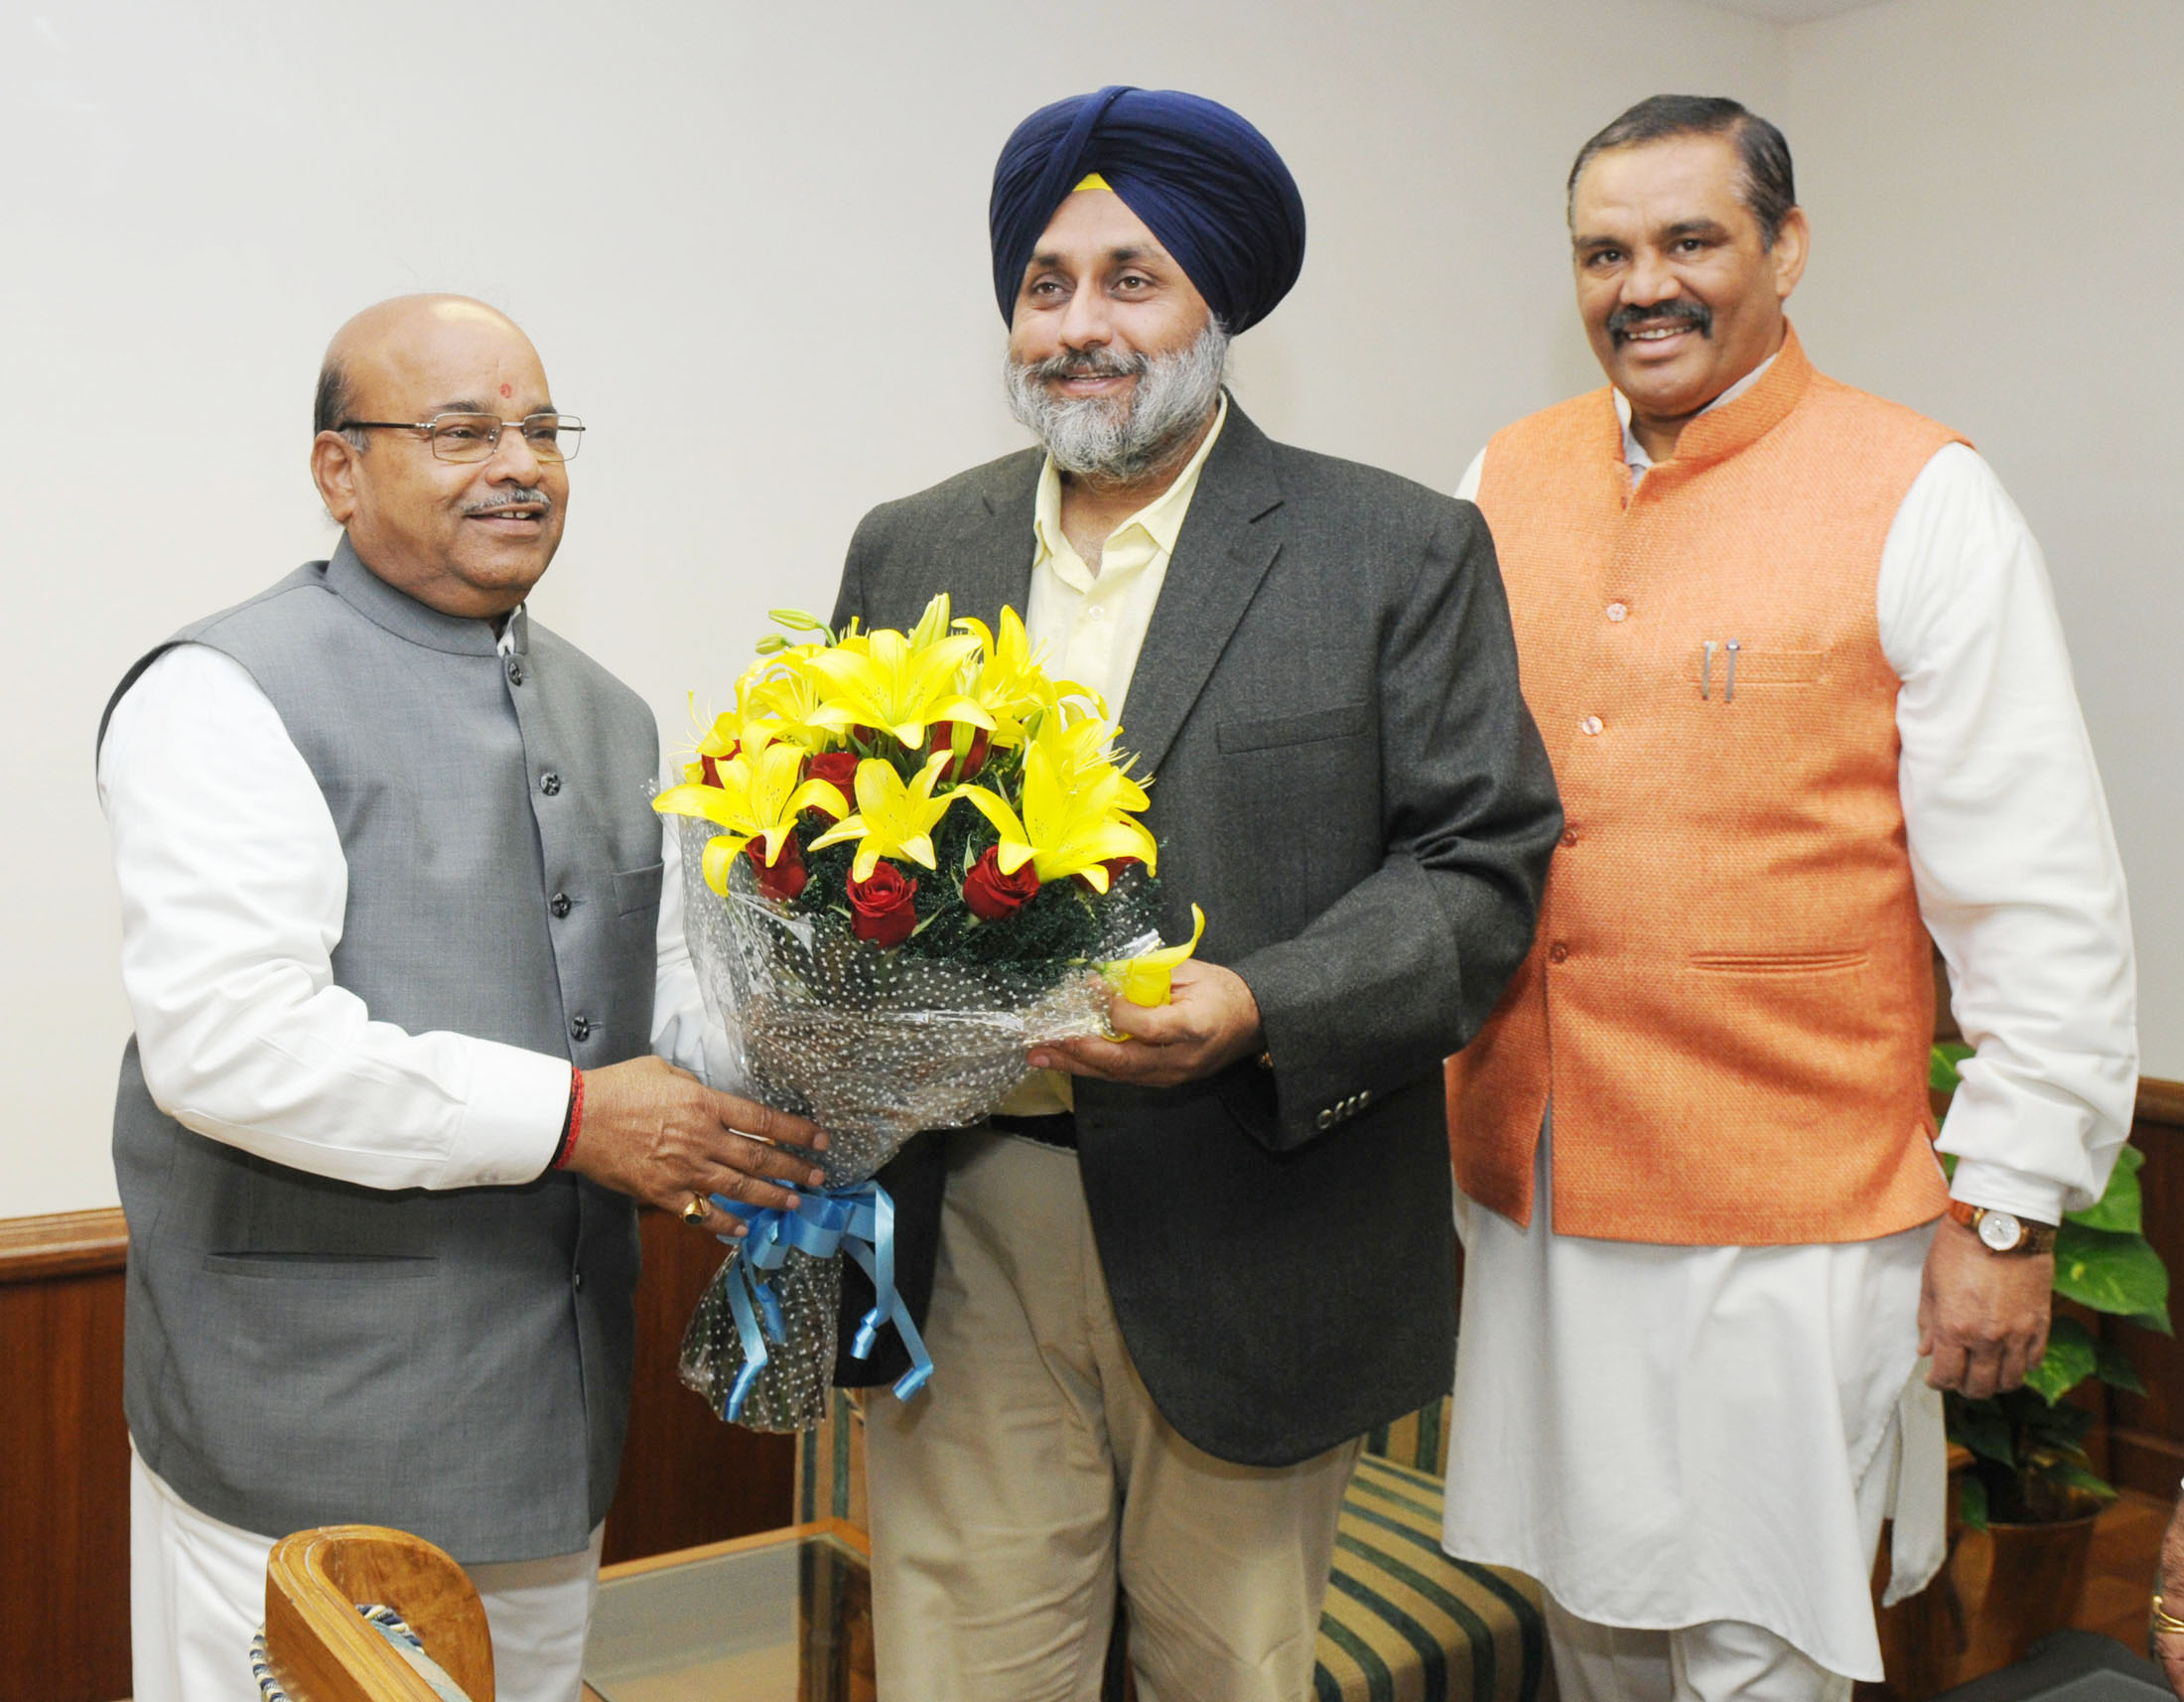 Sukhbir Singh Badal calling on the Union Minister for Social Justice and Empowerment,Thaawar Chand Gehlot,